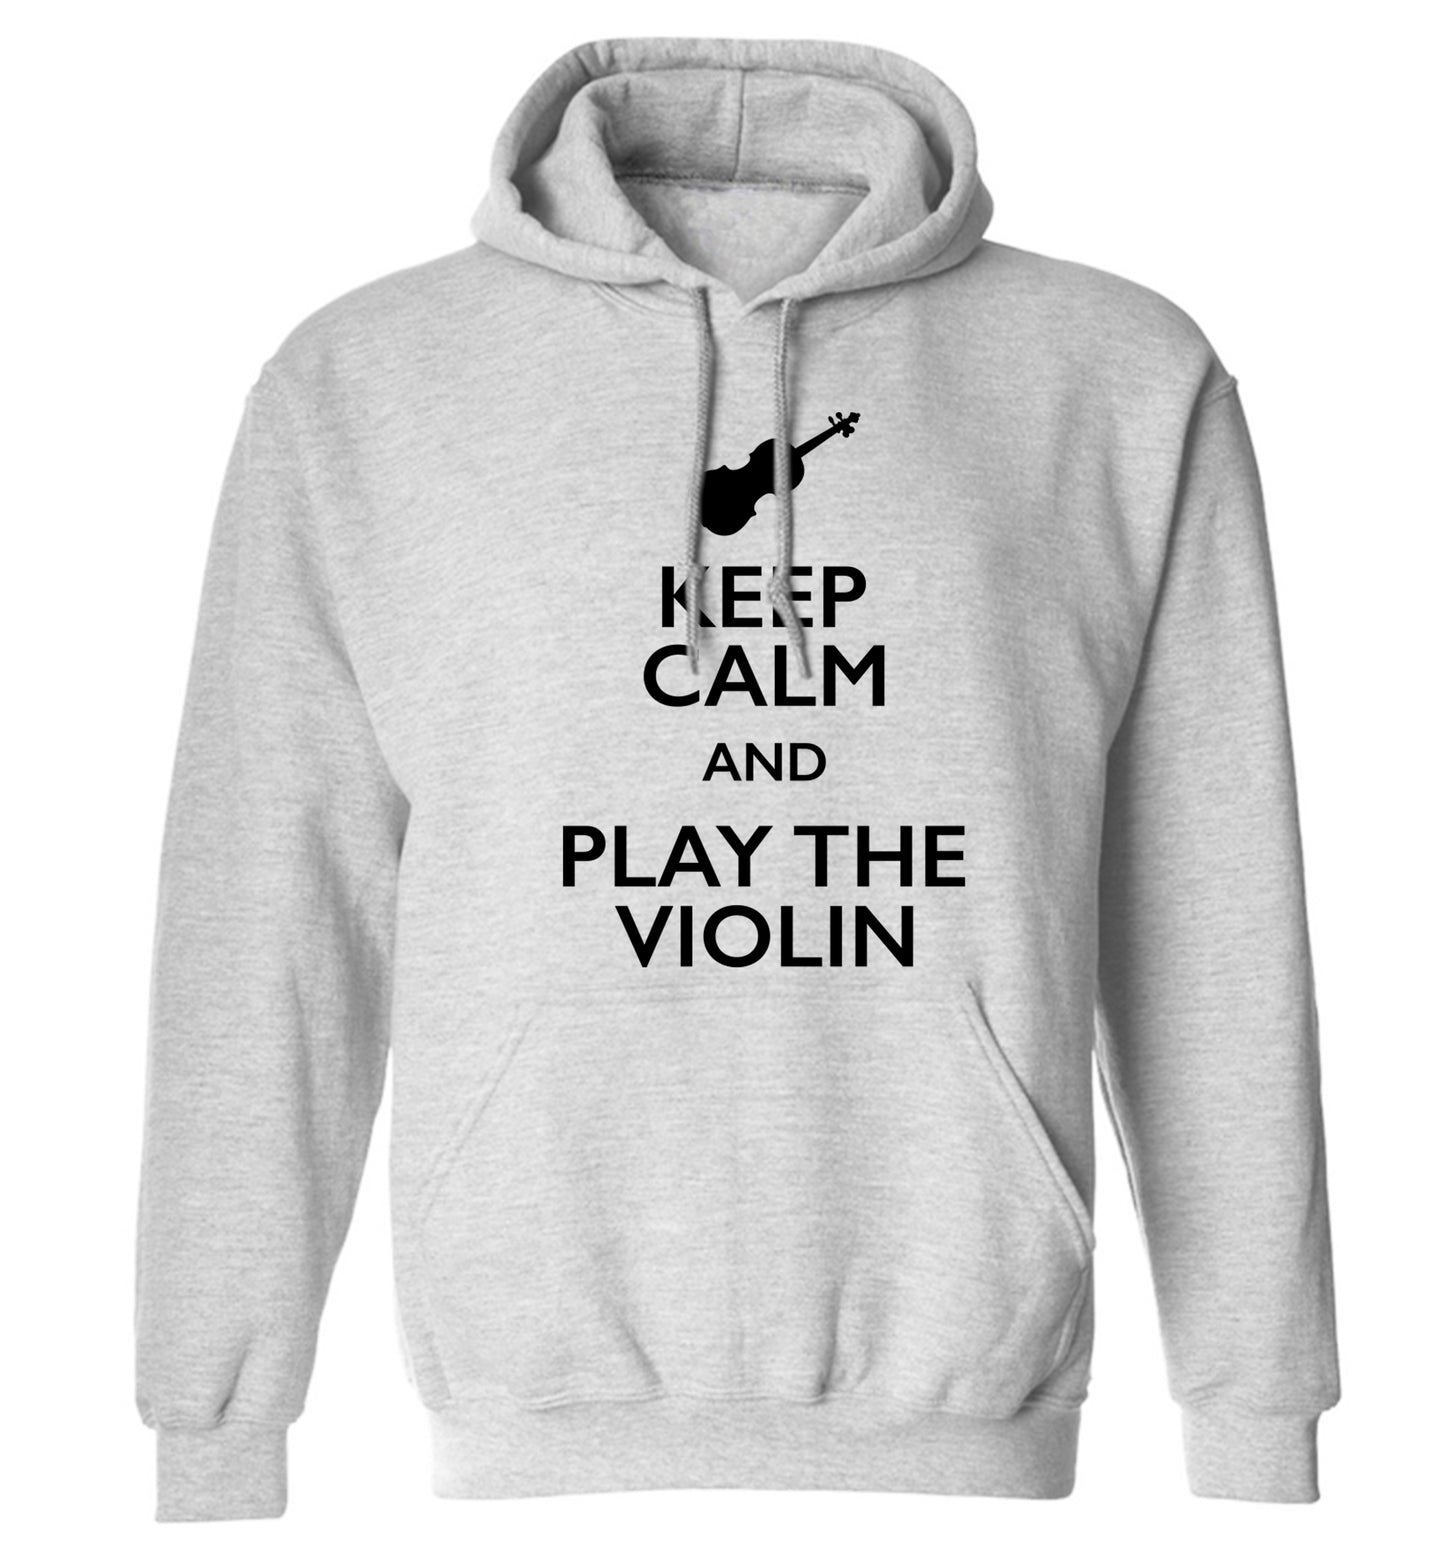 Keep calm and play the violin adults unisex grey hoodie 2XL